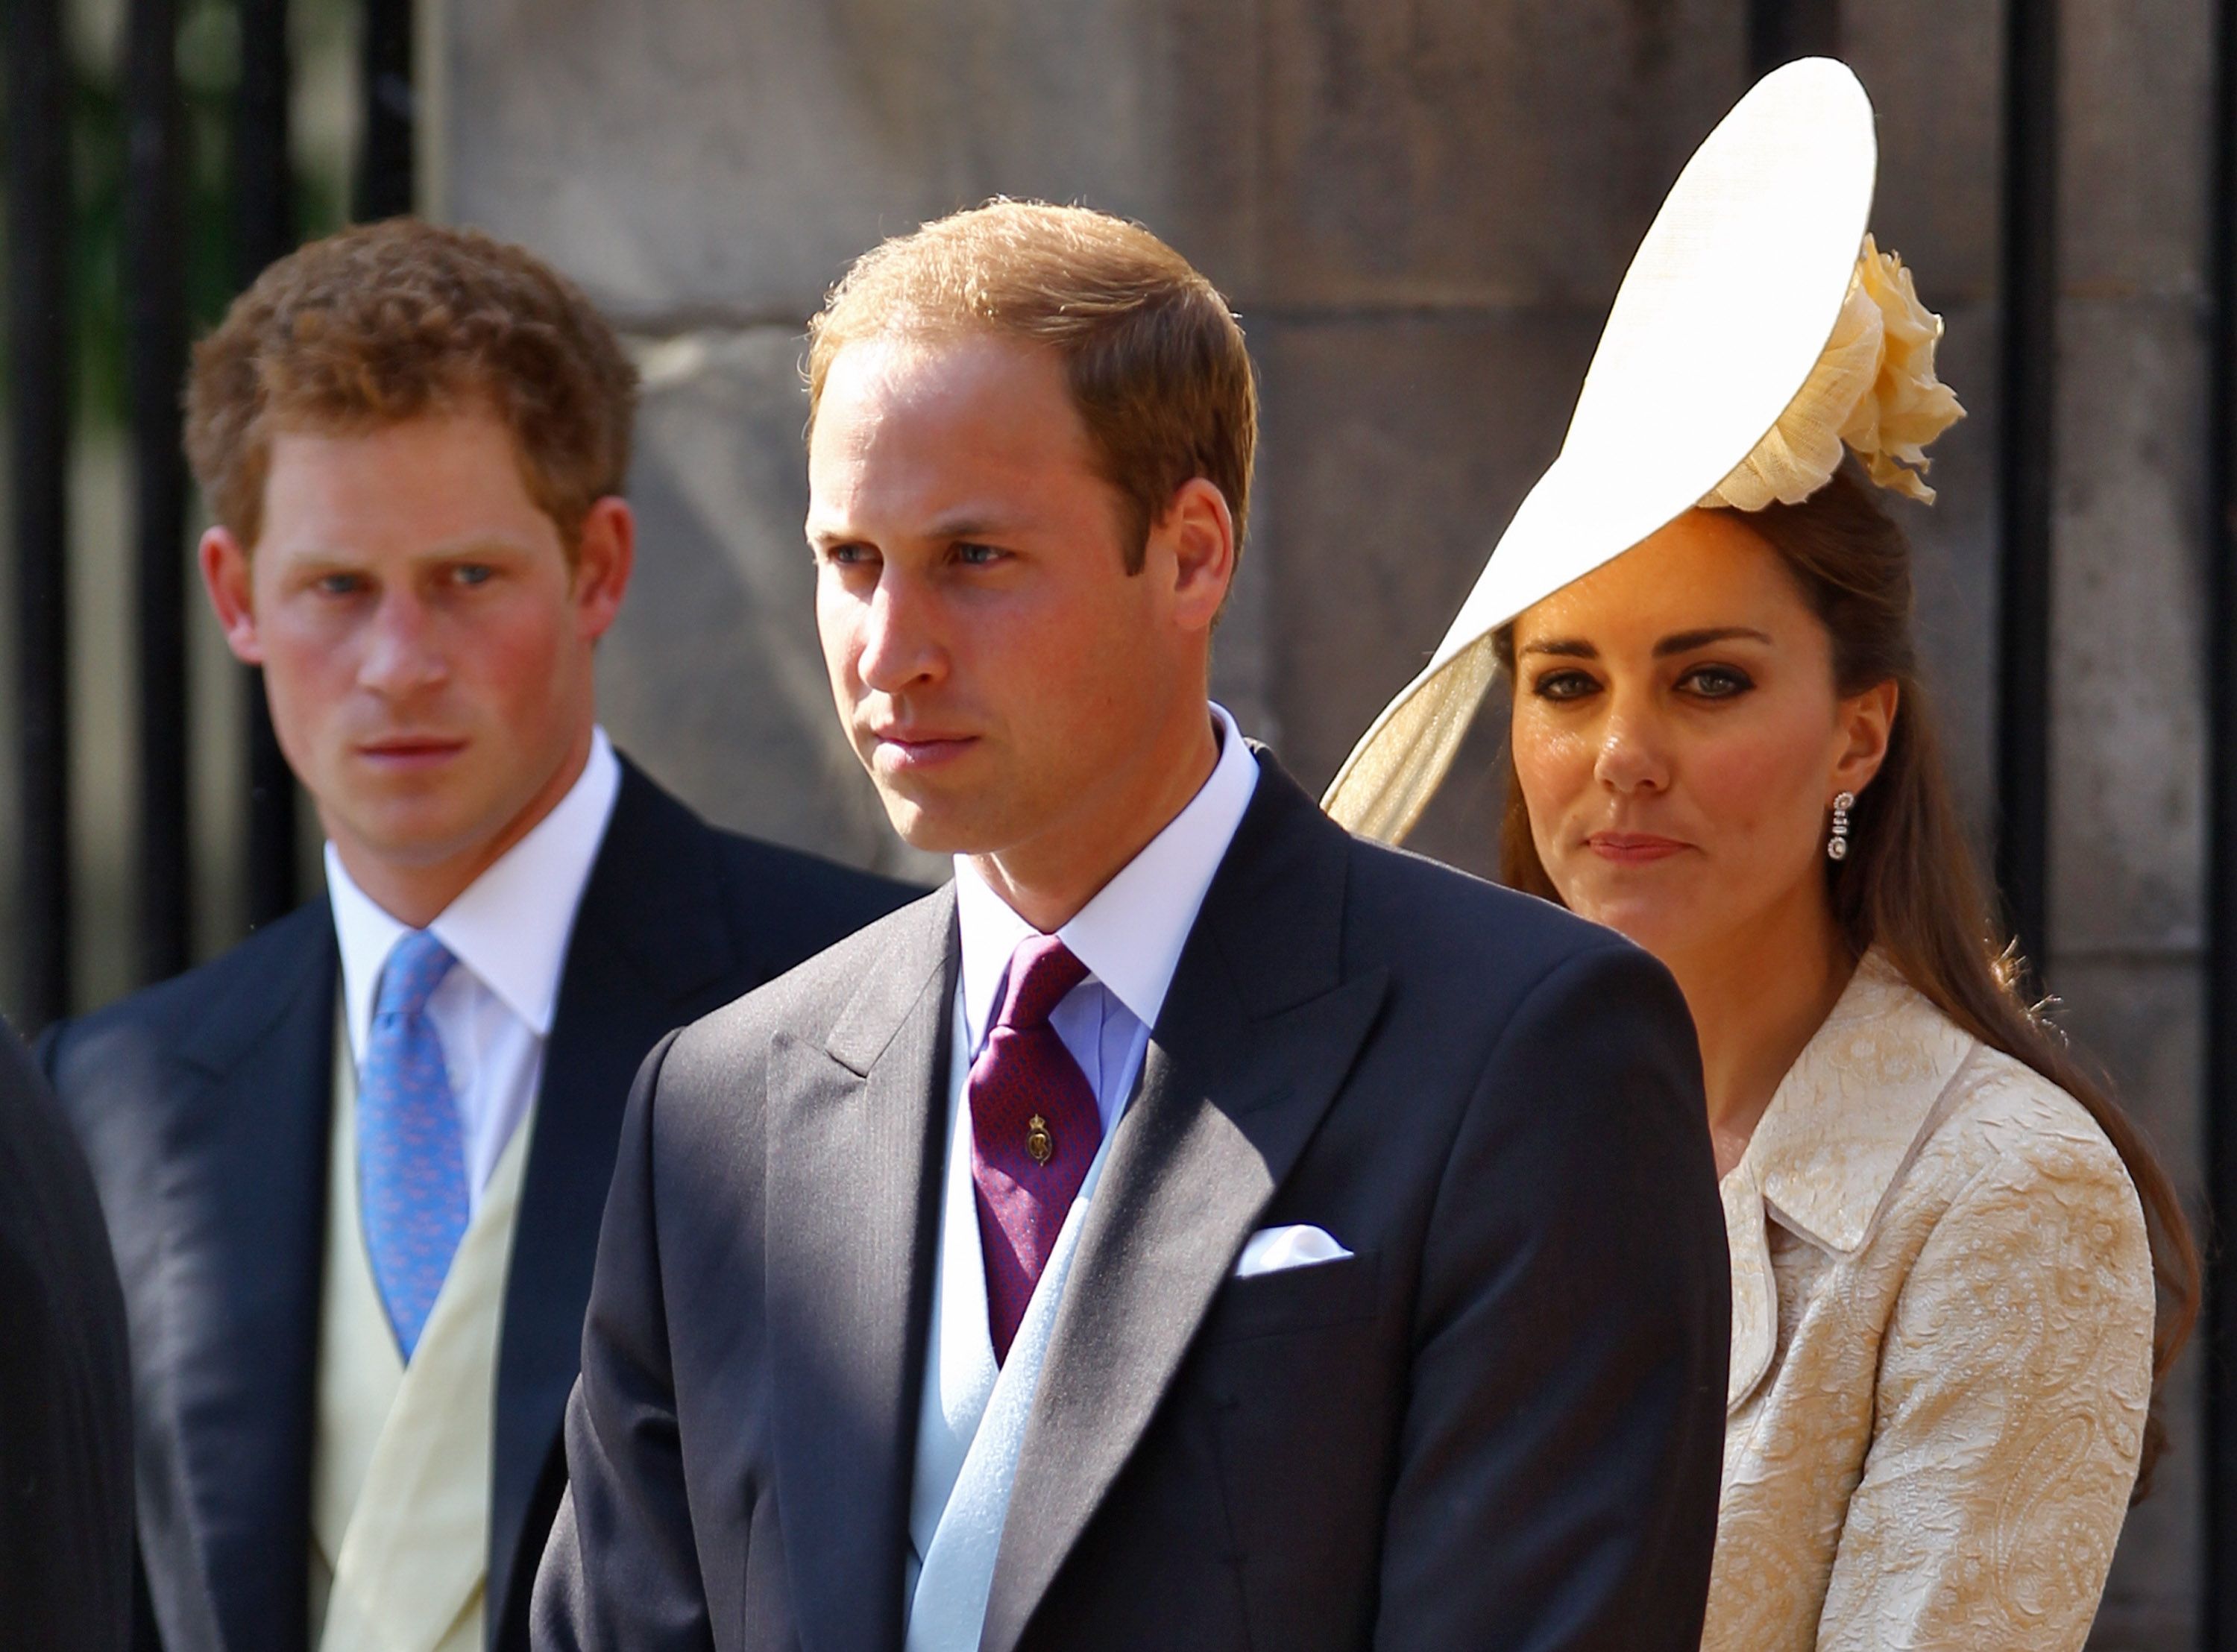 Prince Harry, Prince William, and Duchess Kate depart after the royal wedding of Zara Phillips and Mike Tindall on July 30, 2011, in Edinburgh, Scotland | Photo: Jeff J Mitchell/Getty Images